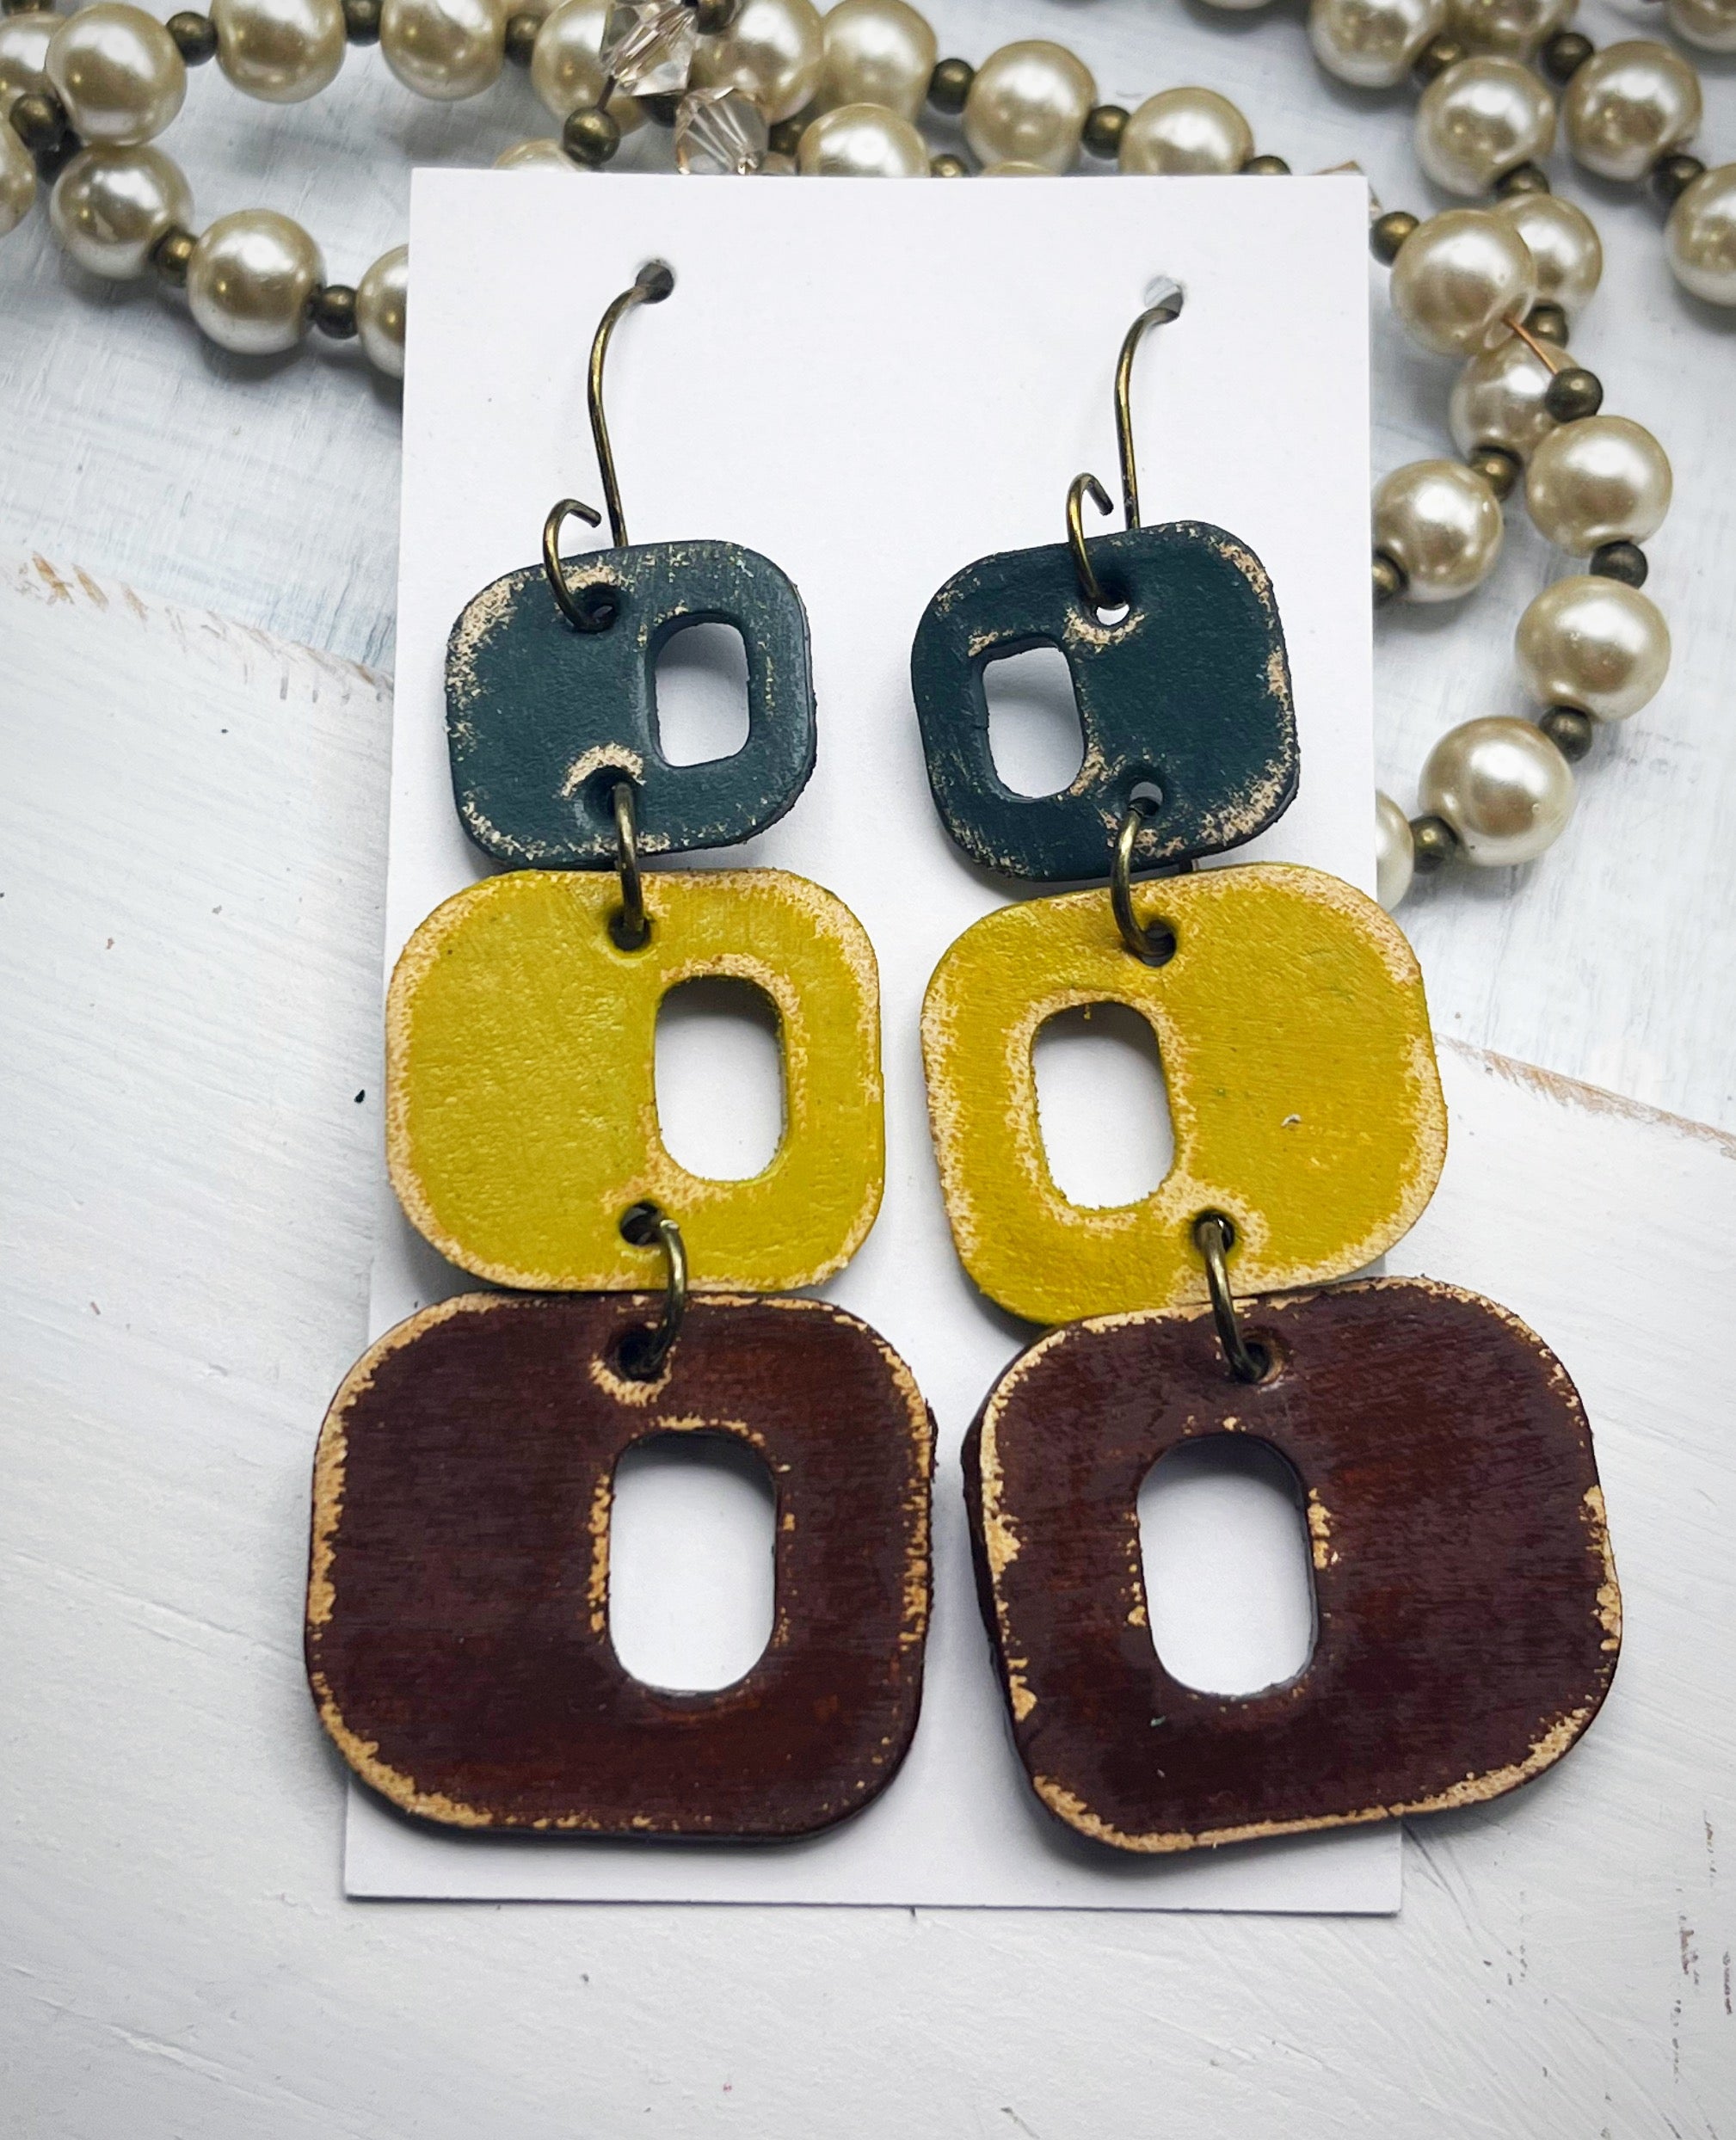 Leather Earrings - Squared Off Dangles